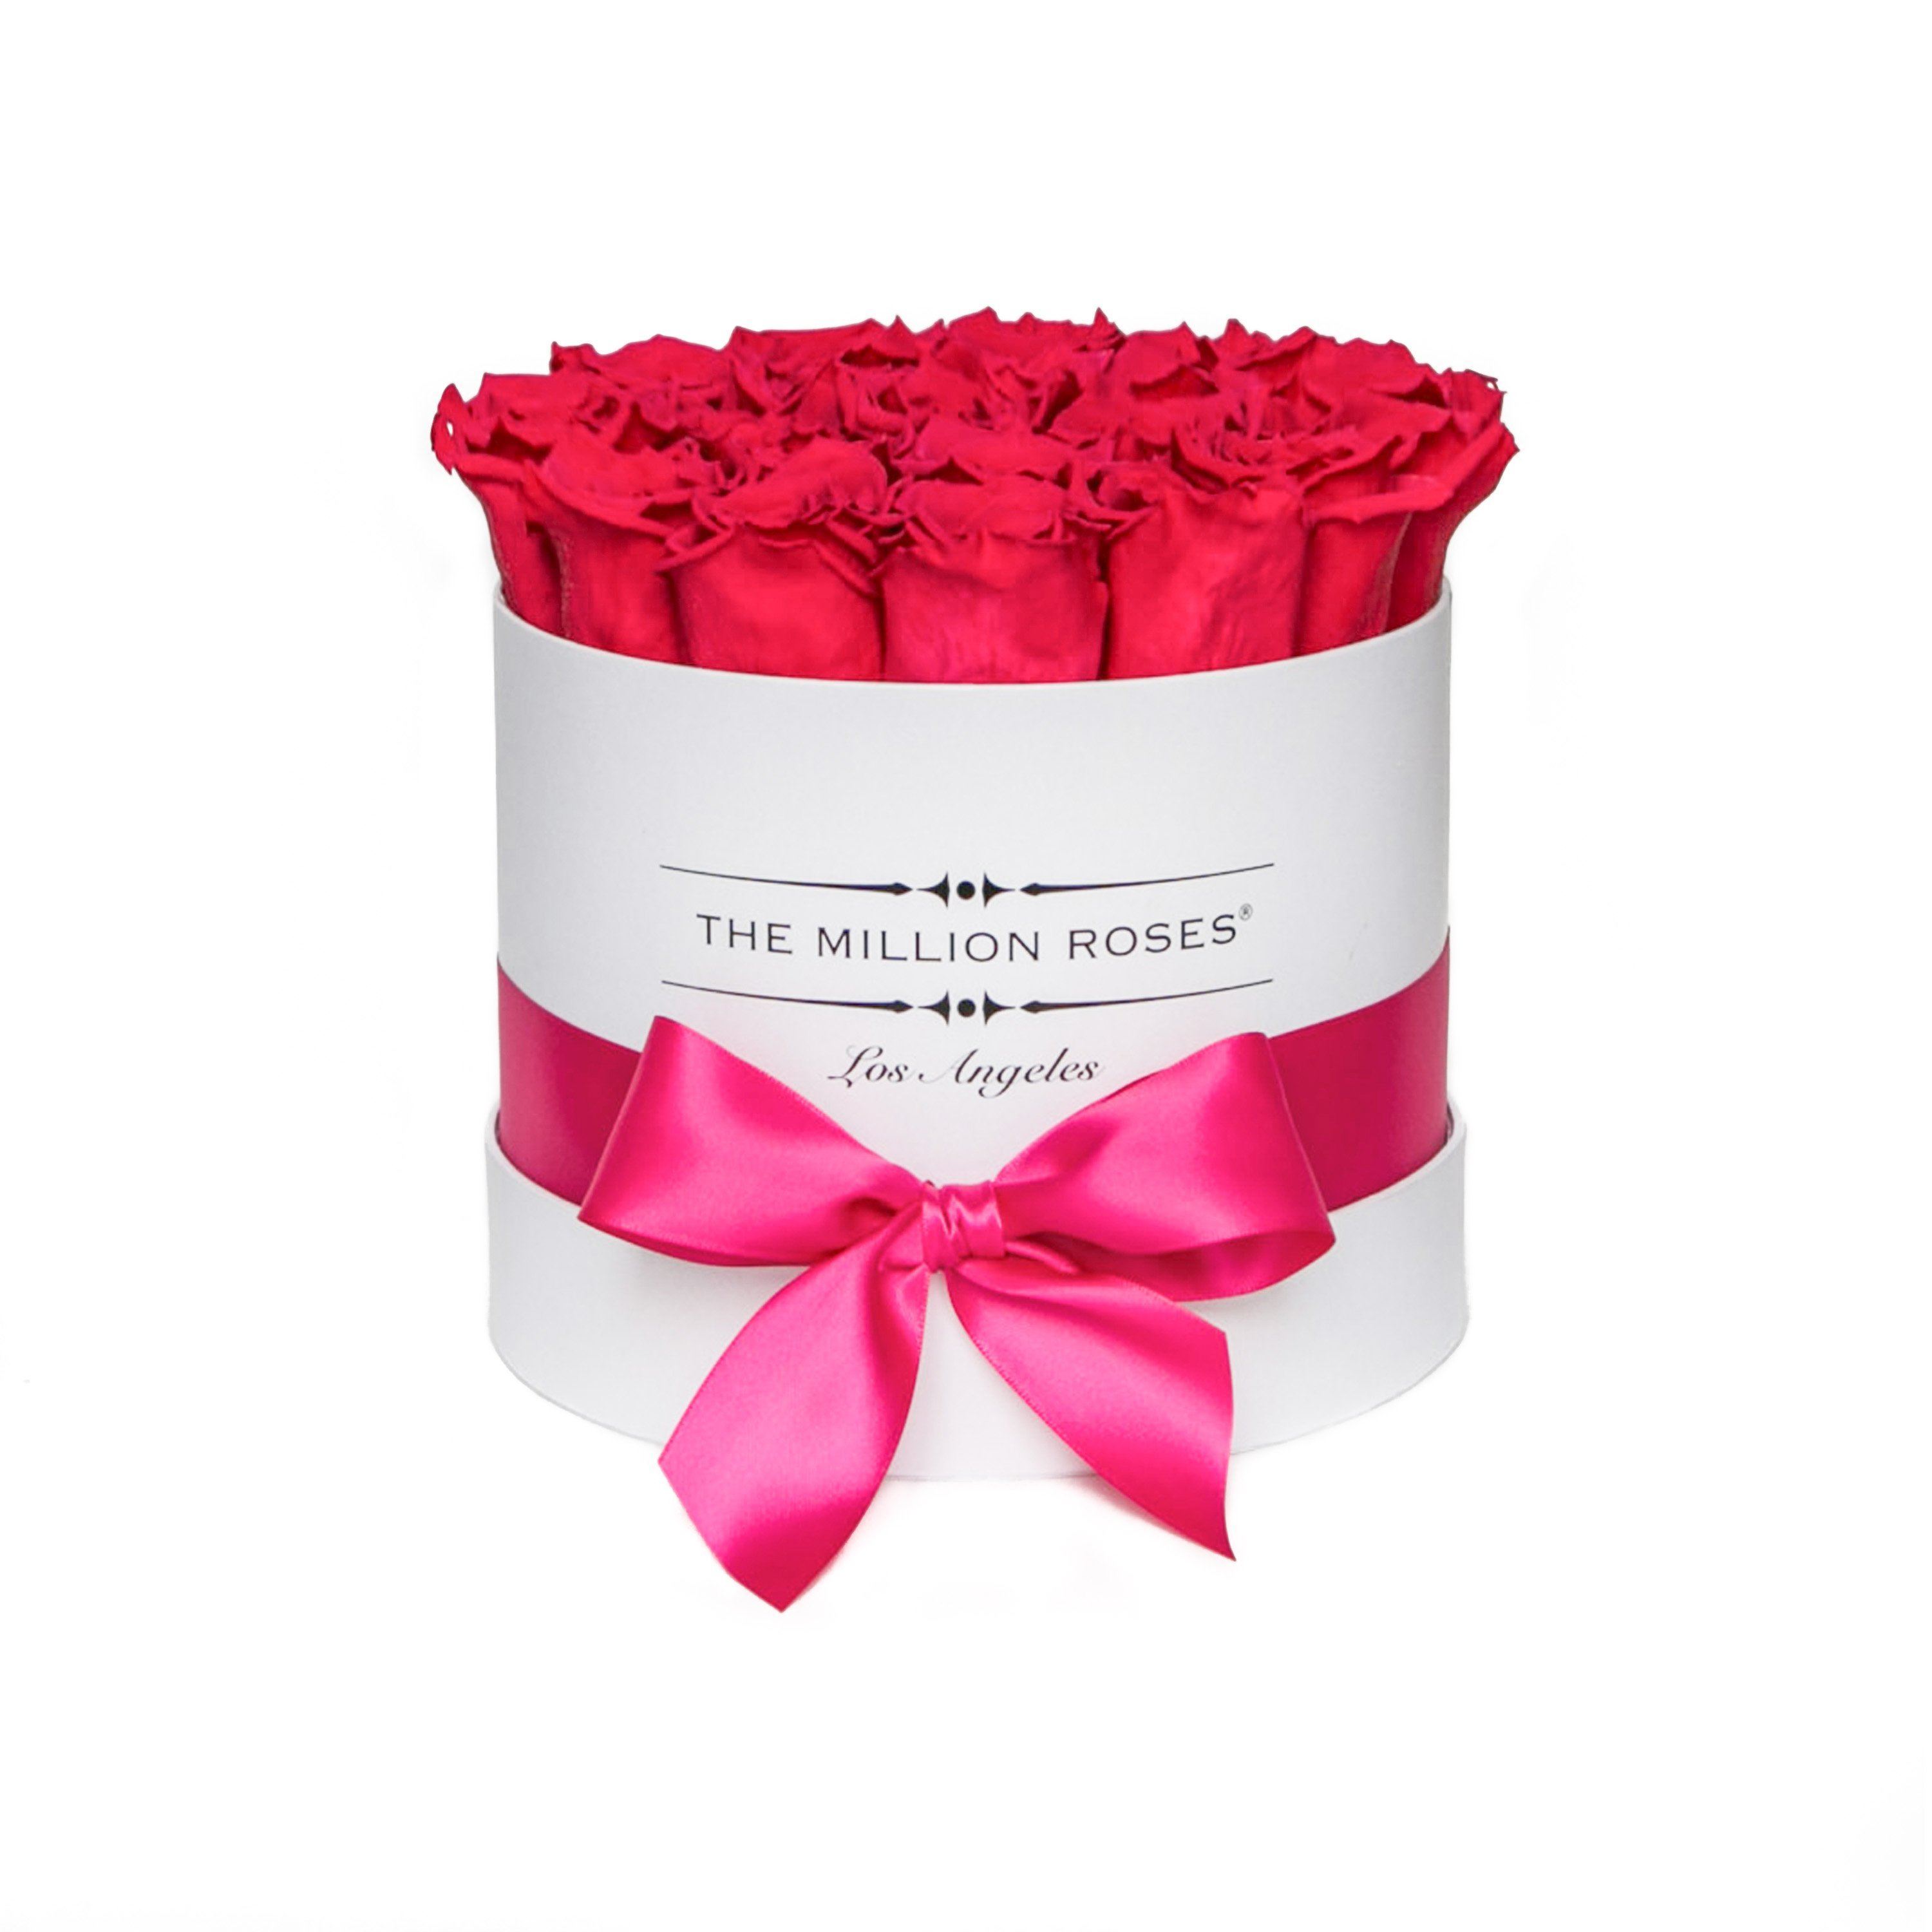 classic round box - white - hot-pink roses pink eternity roses - the million roses